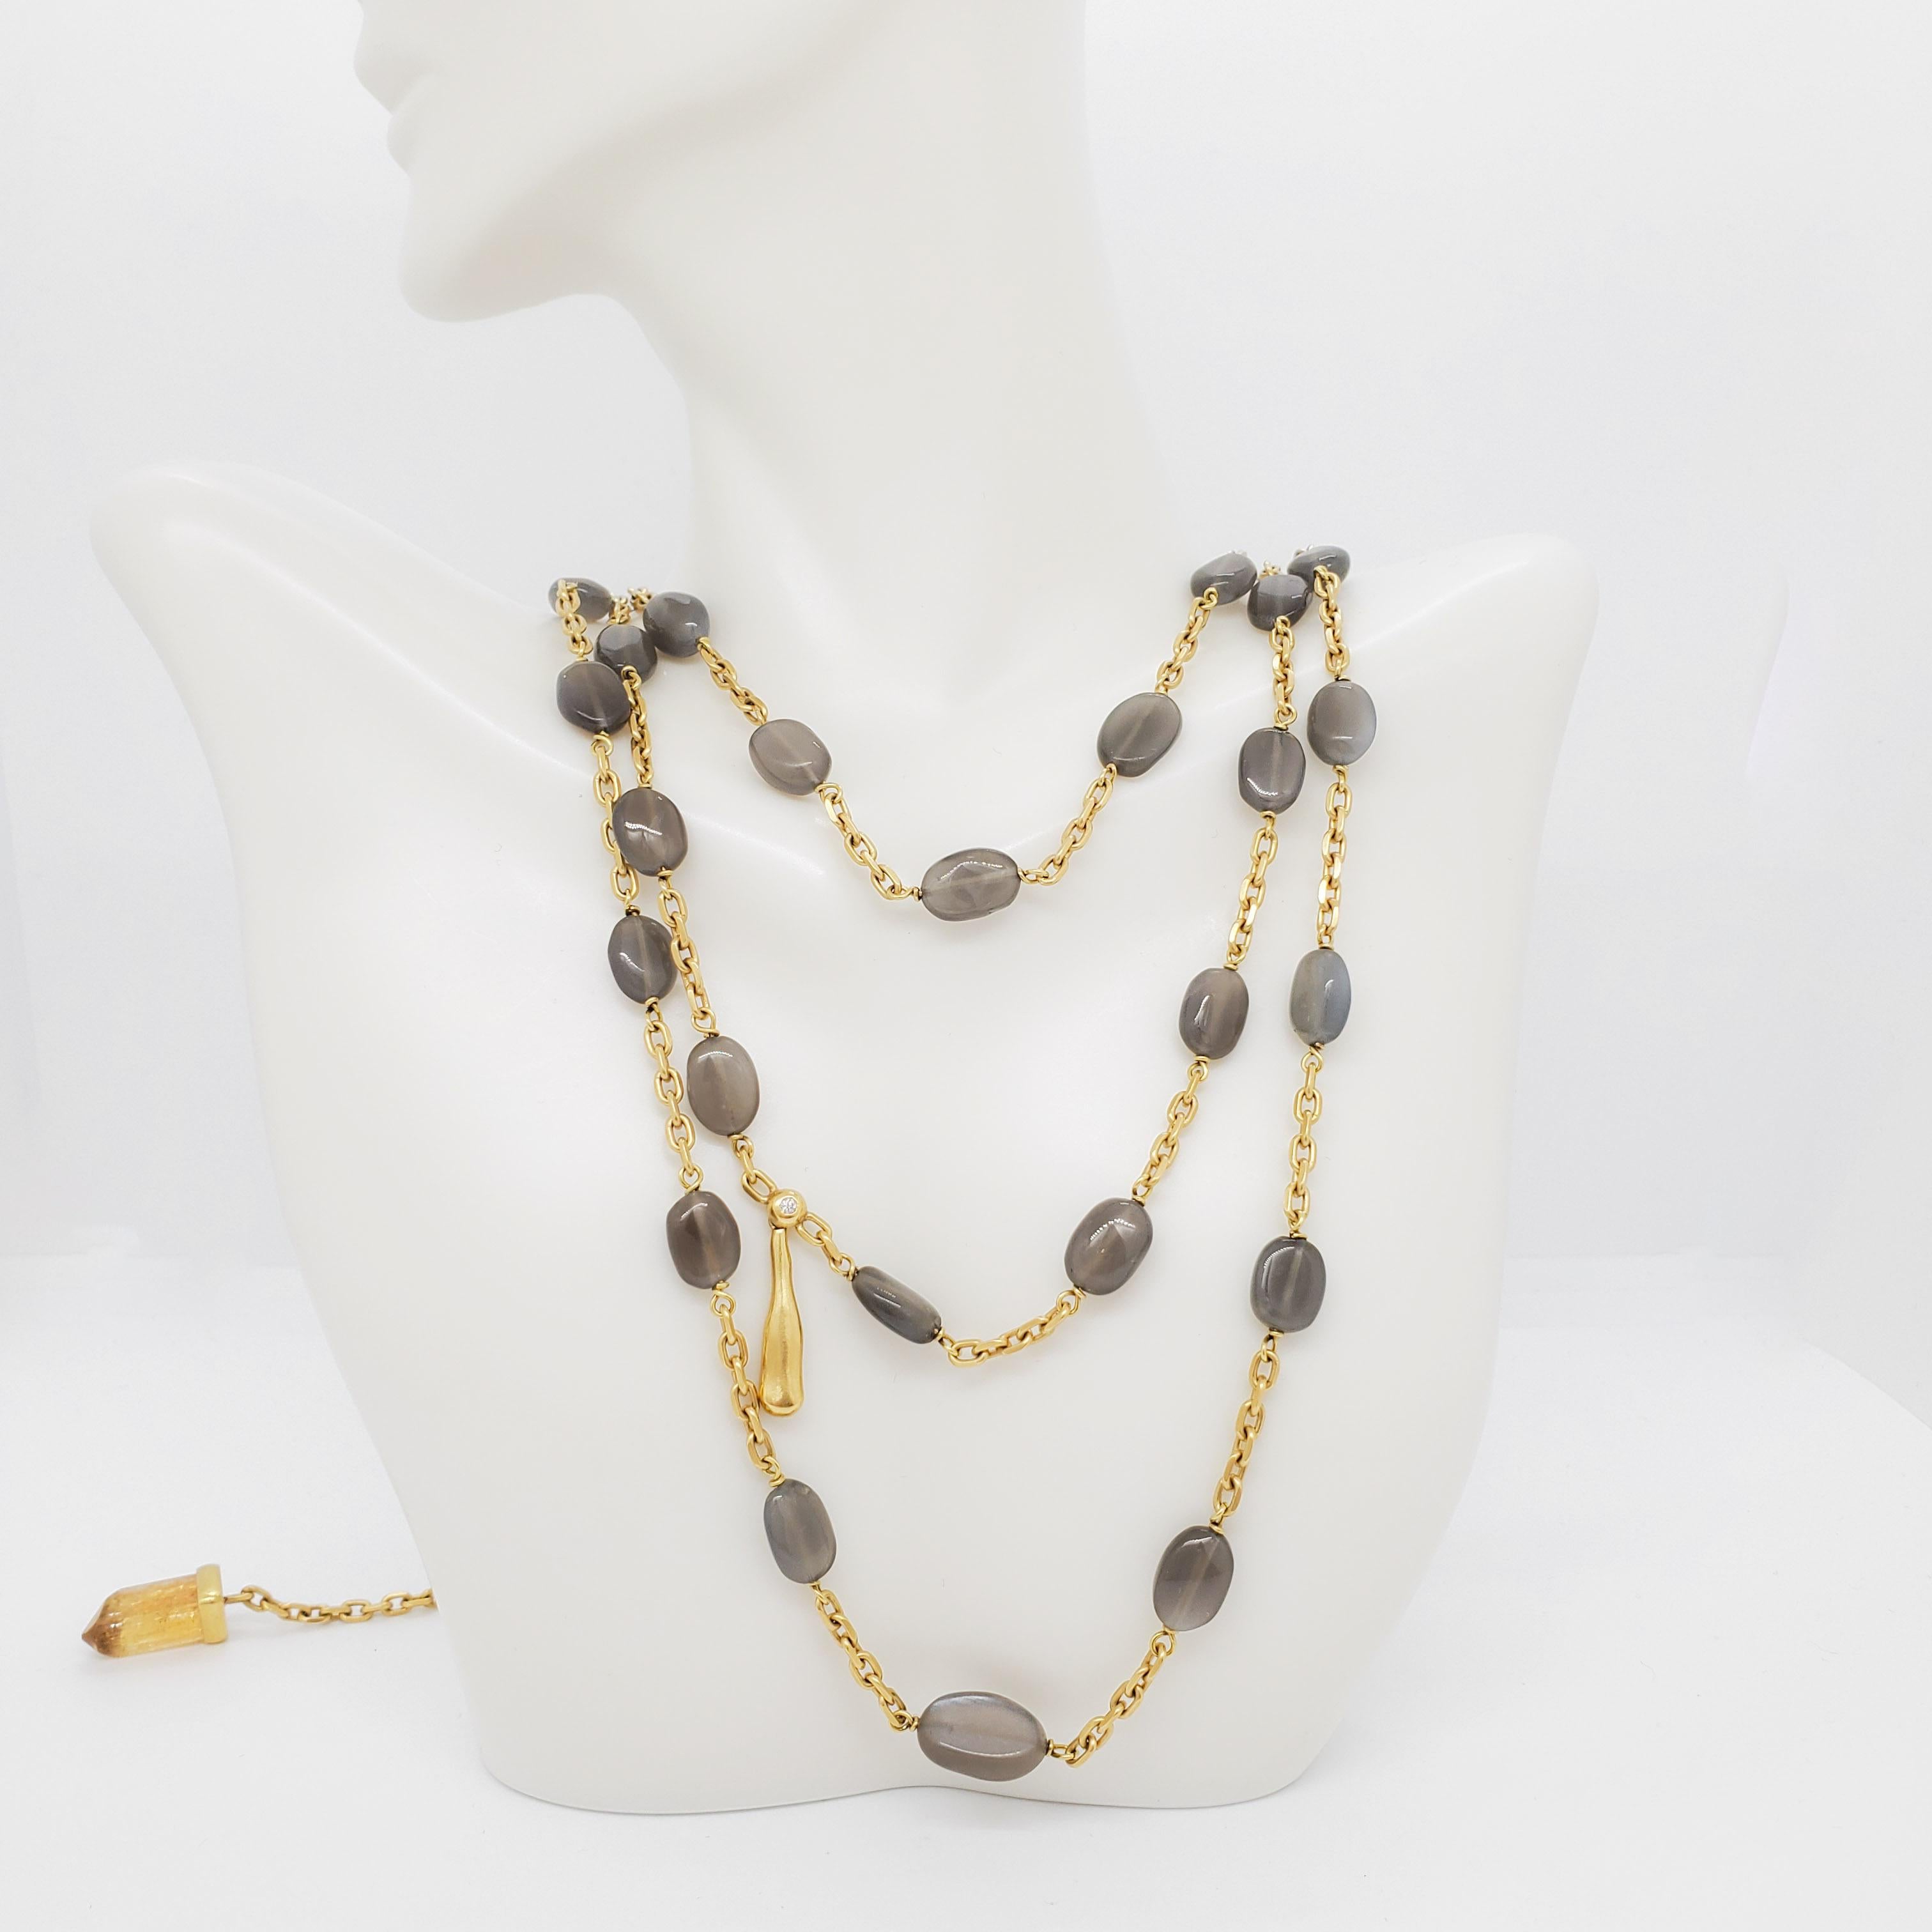 Gorgeous H. Stern estate necklace with 37 gray stone beads and 0.02 ct. white diamond rounds handmade in 18k yellow gold.  